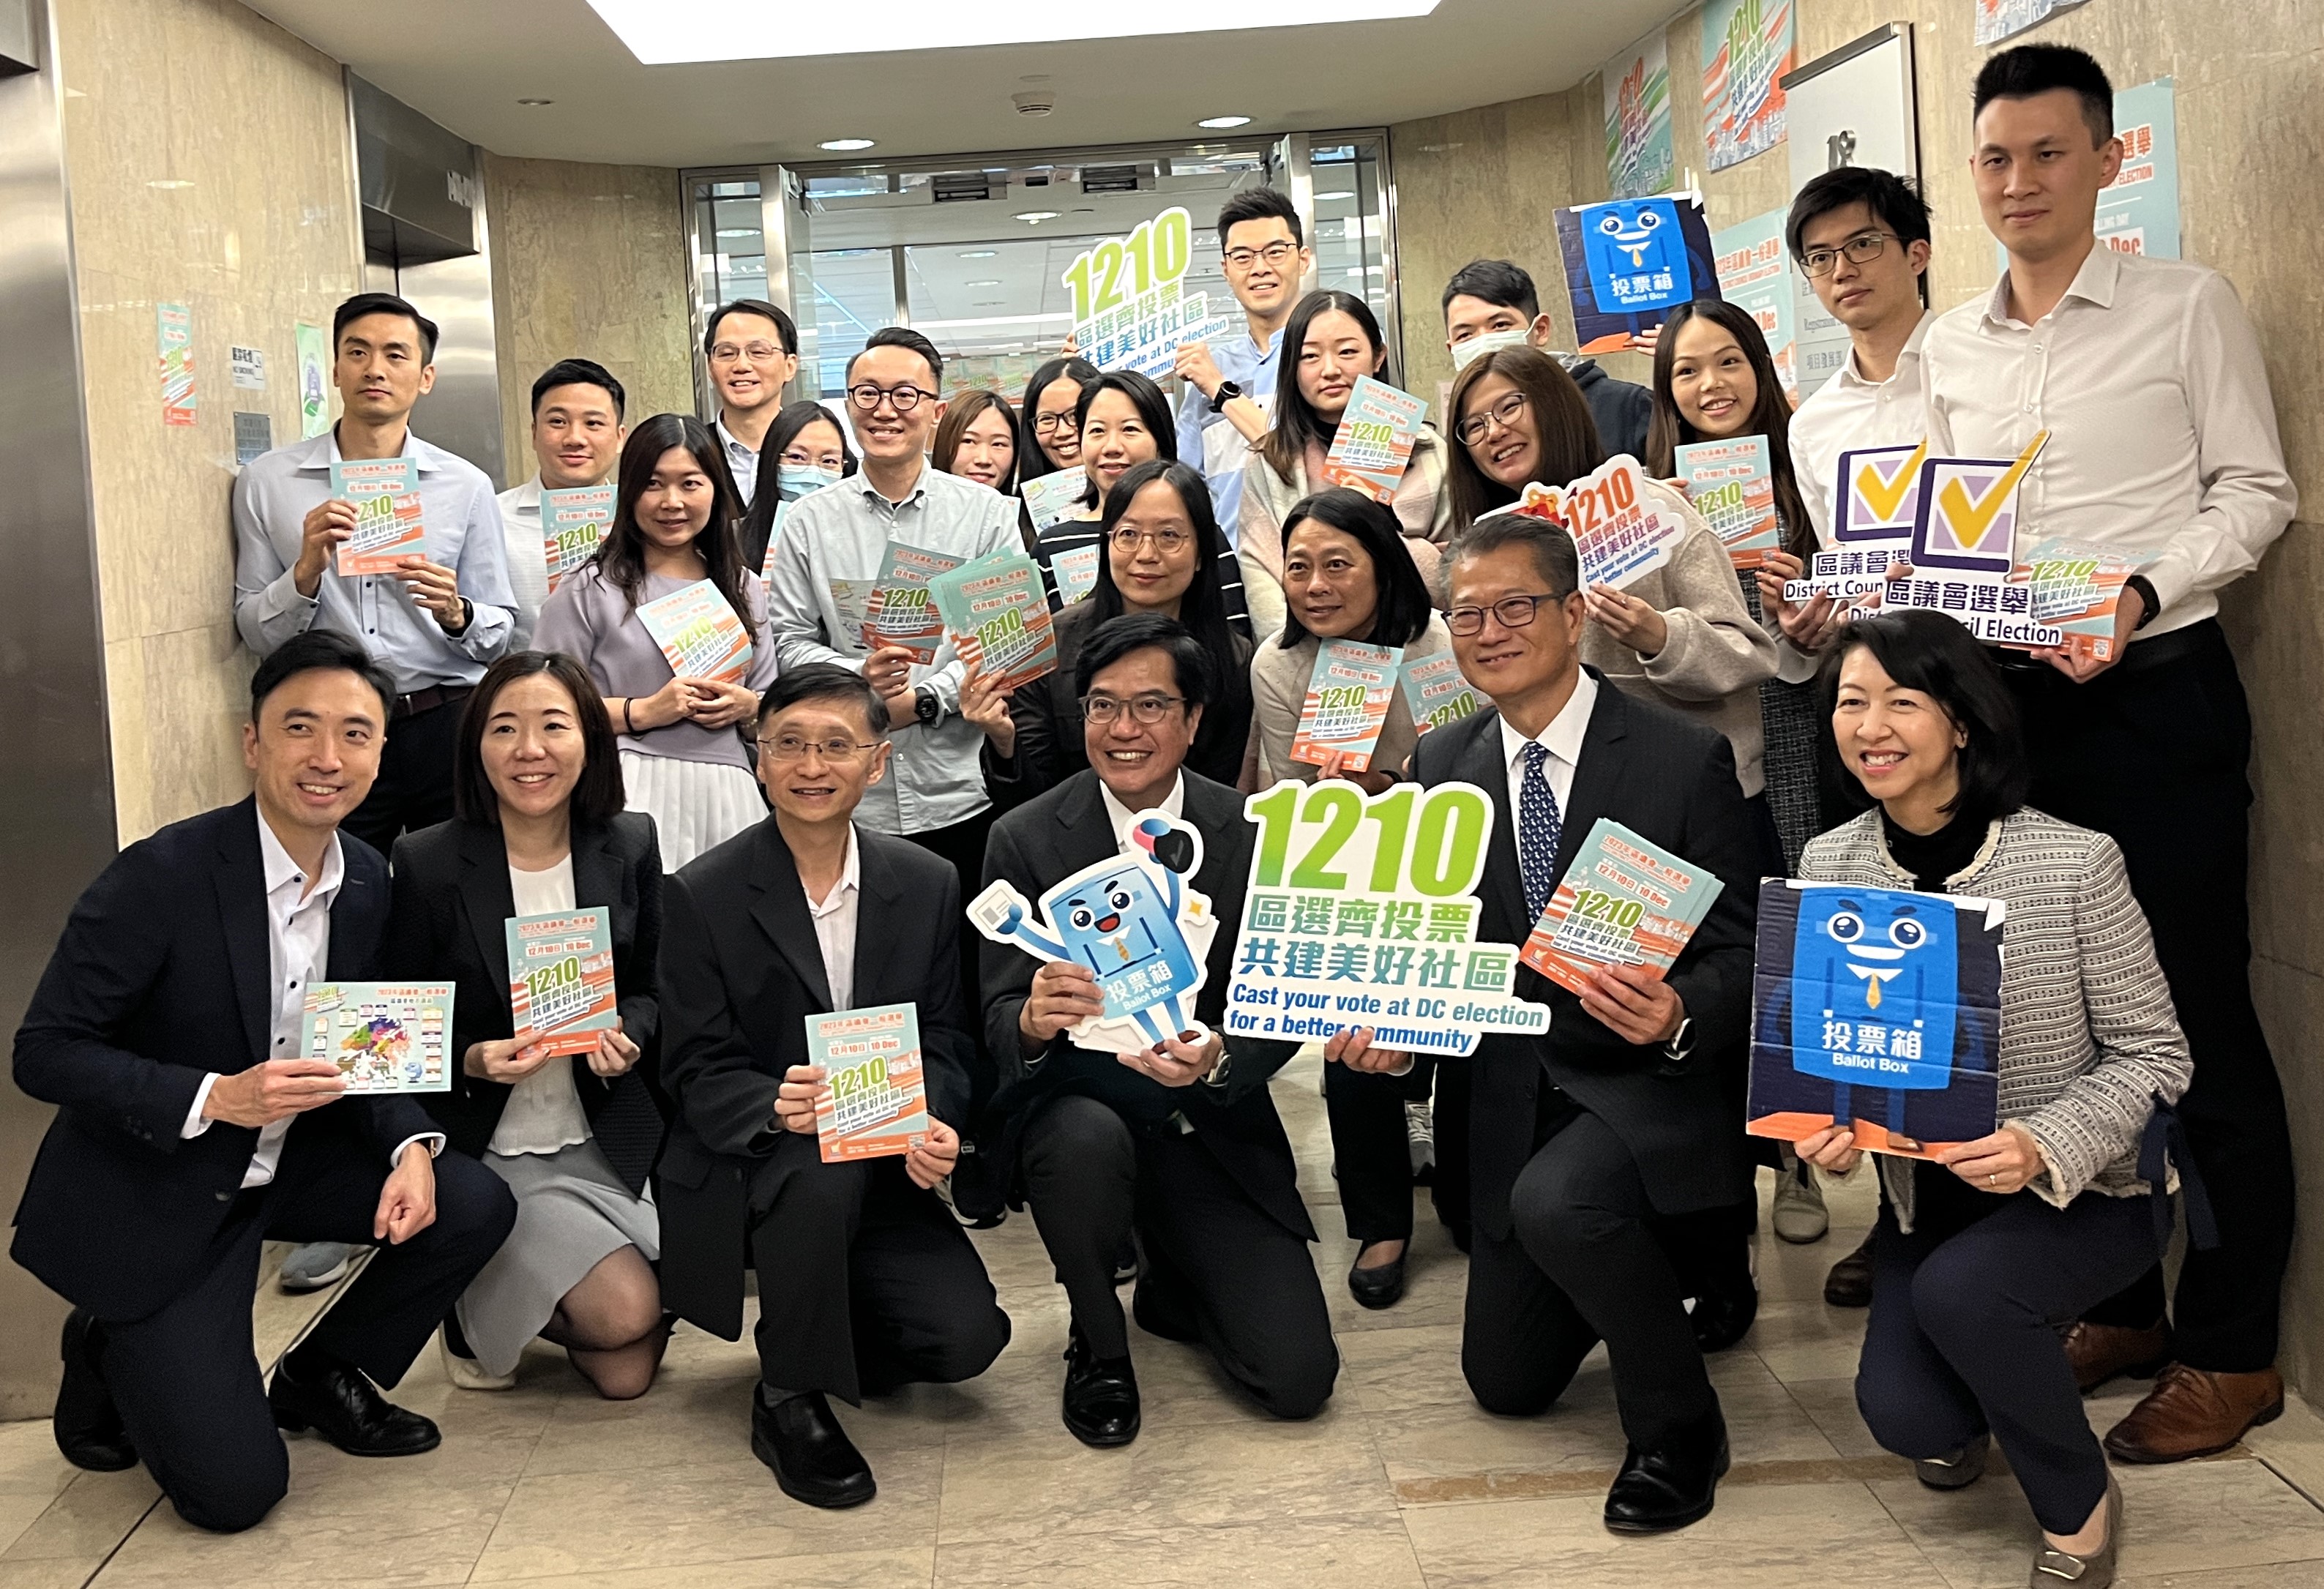 The Financial Secretary, Mr Paul CHAN, GBM GBS MH JP (second from the right, front row) and the Deputy Financial Secretary, Mr Michael WONG, GBS JP (third from the right, front row) visited the Land Registry to promote the DC election and encouraged staff members to vote